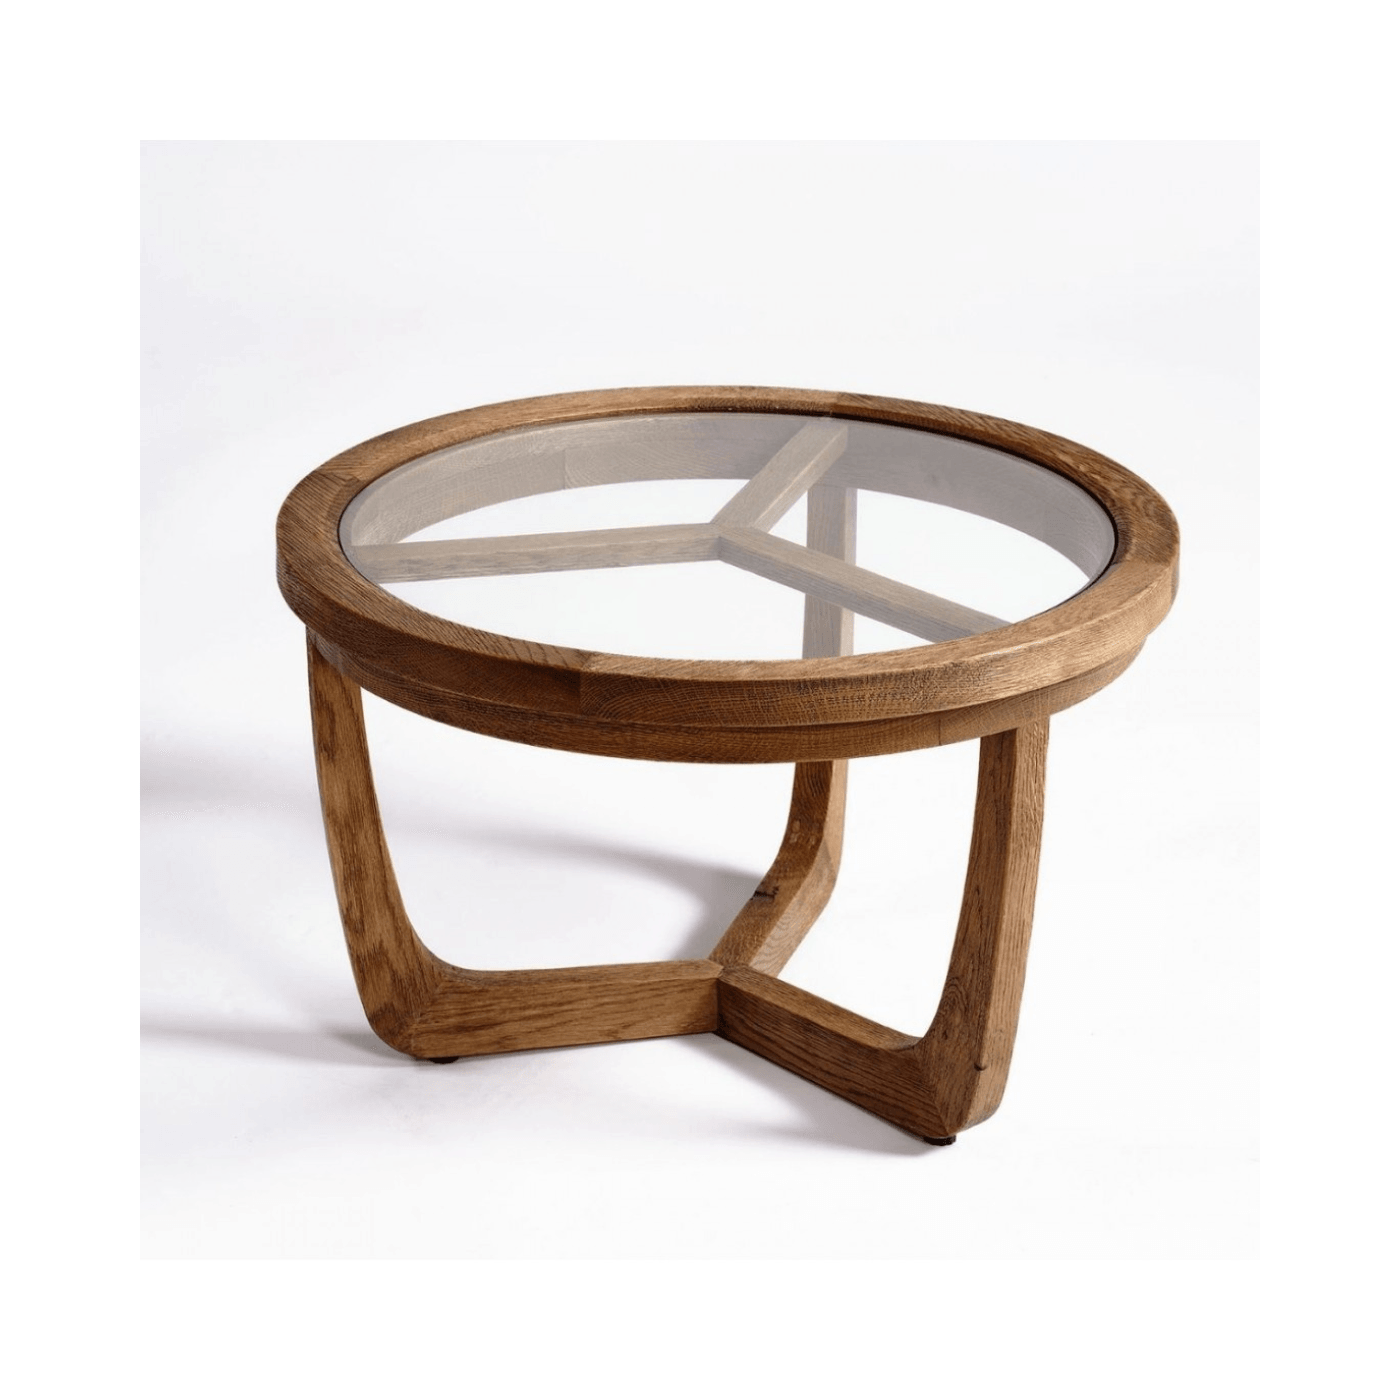 Ariana Natural Oak Wood Round Coffee Table with Glass Top - Maison Rêves UK